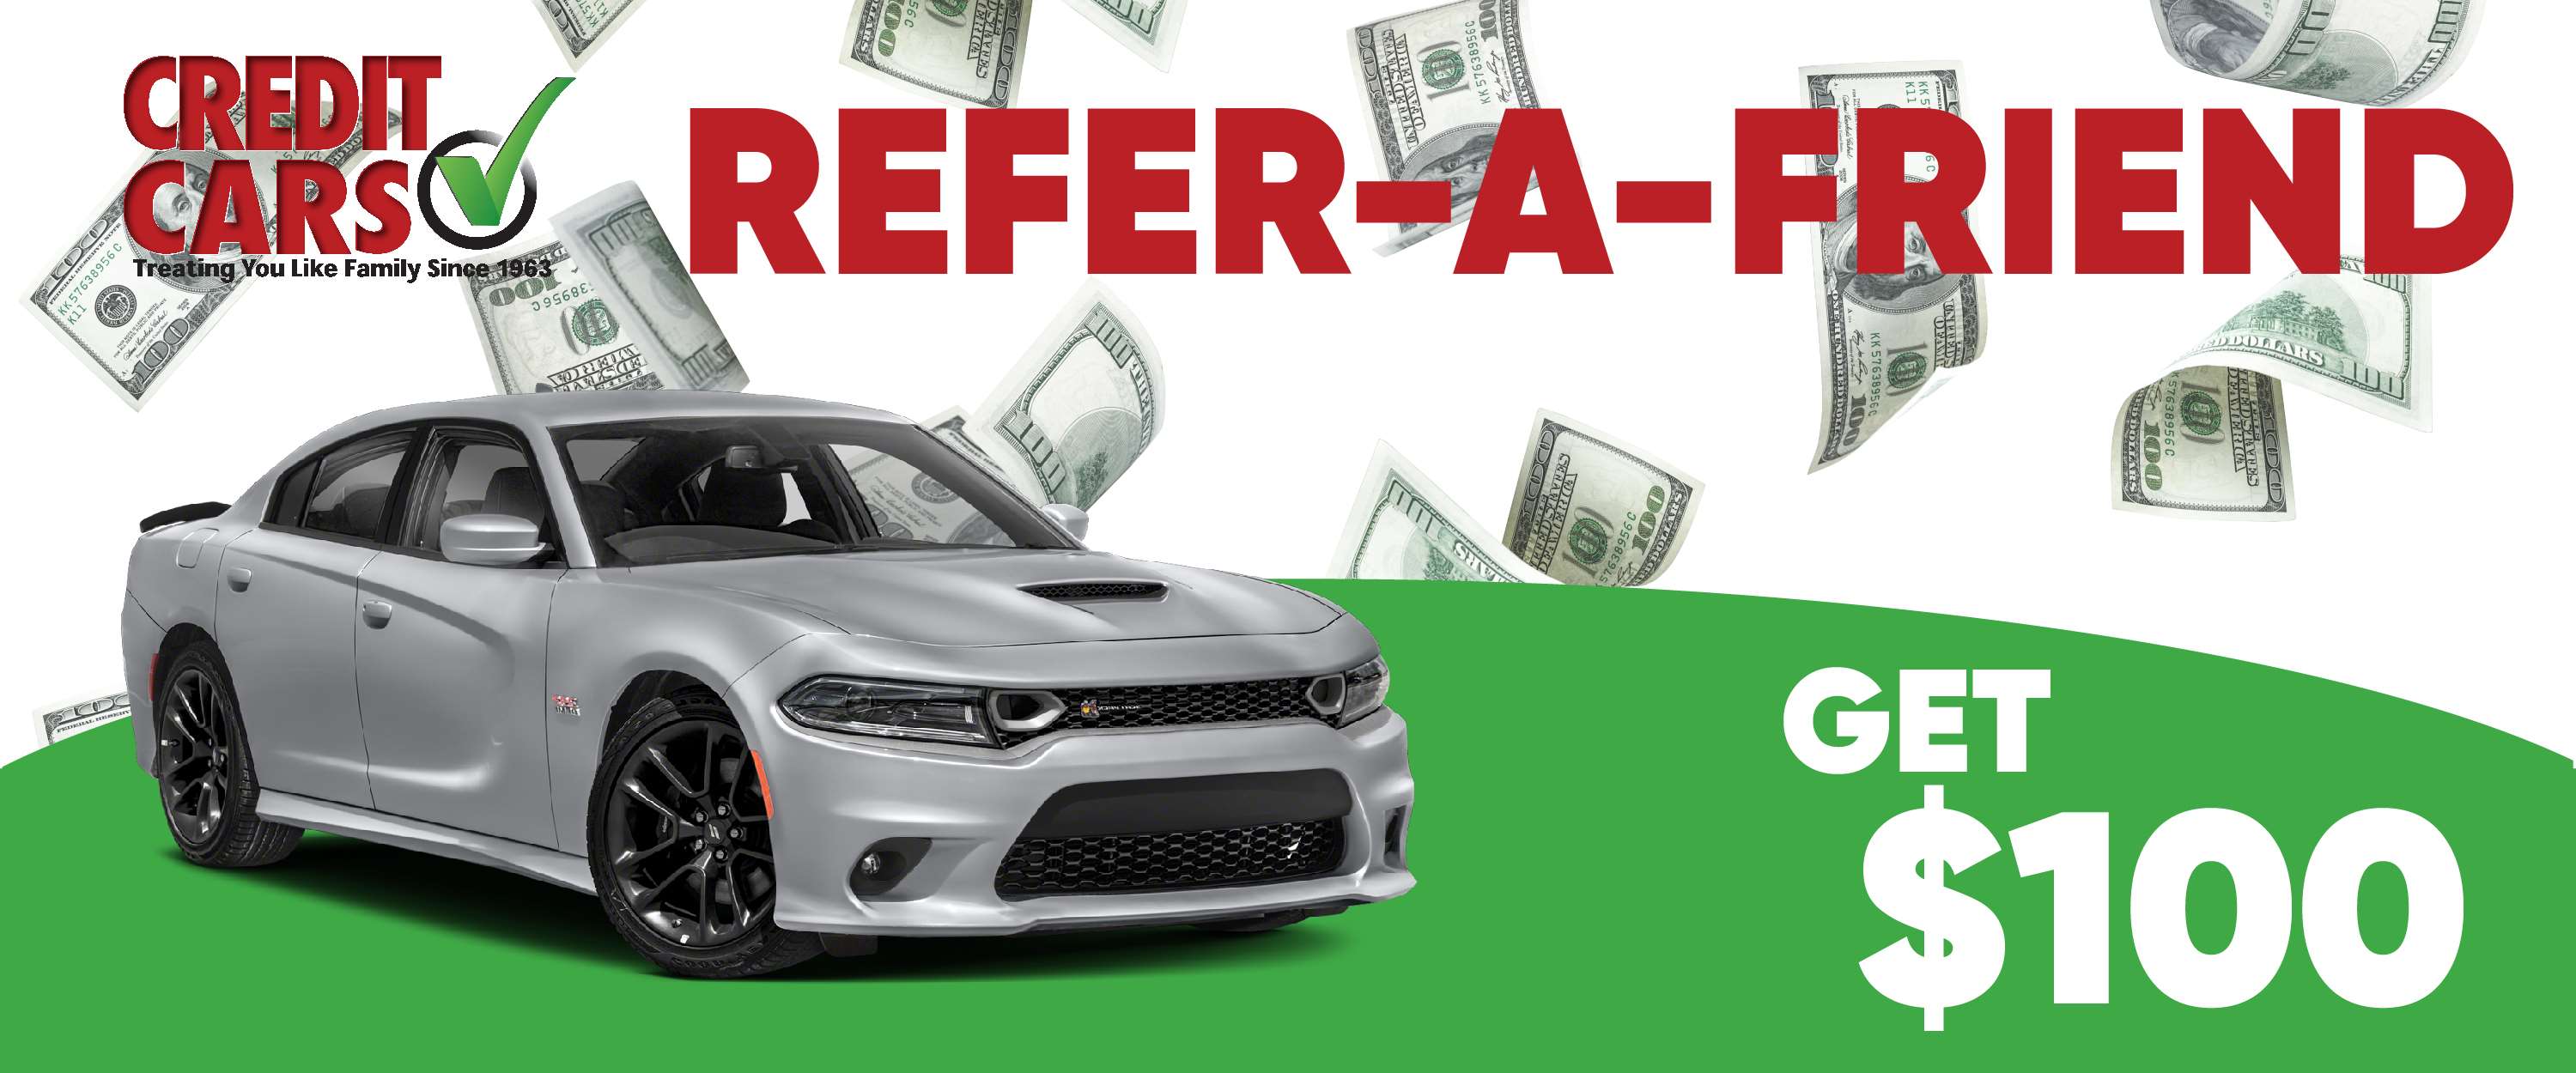 Refer a Friend to get $100